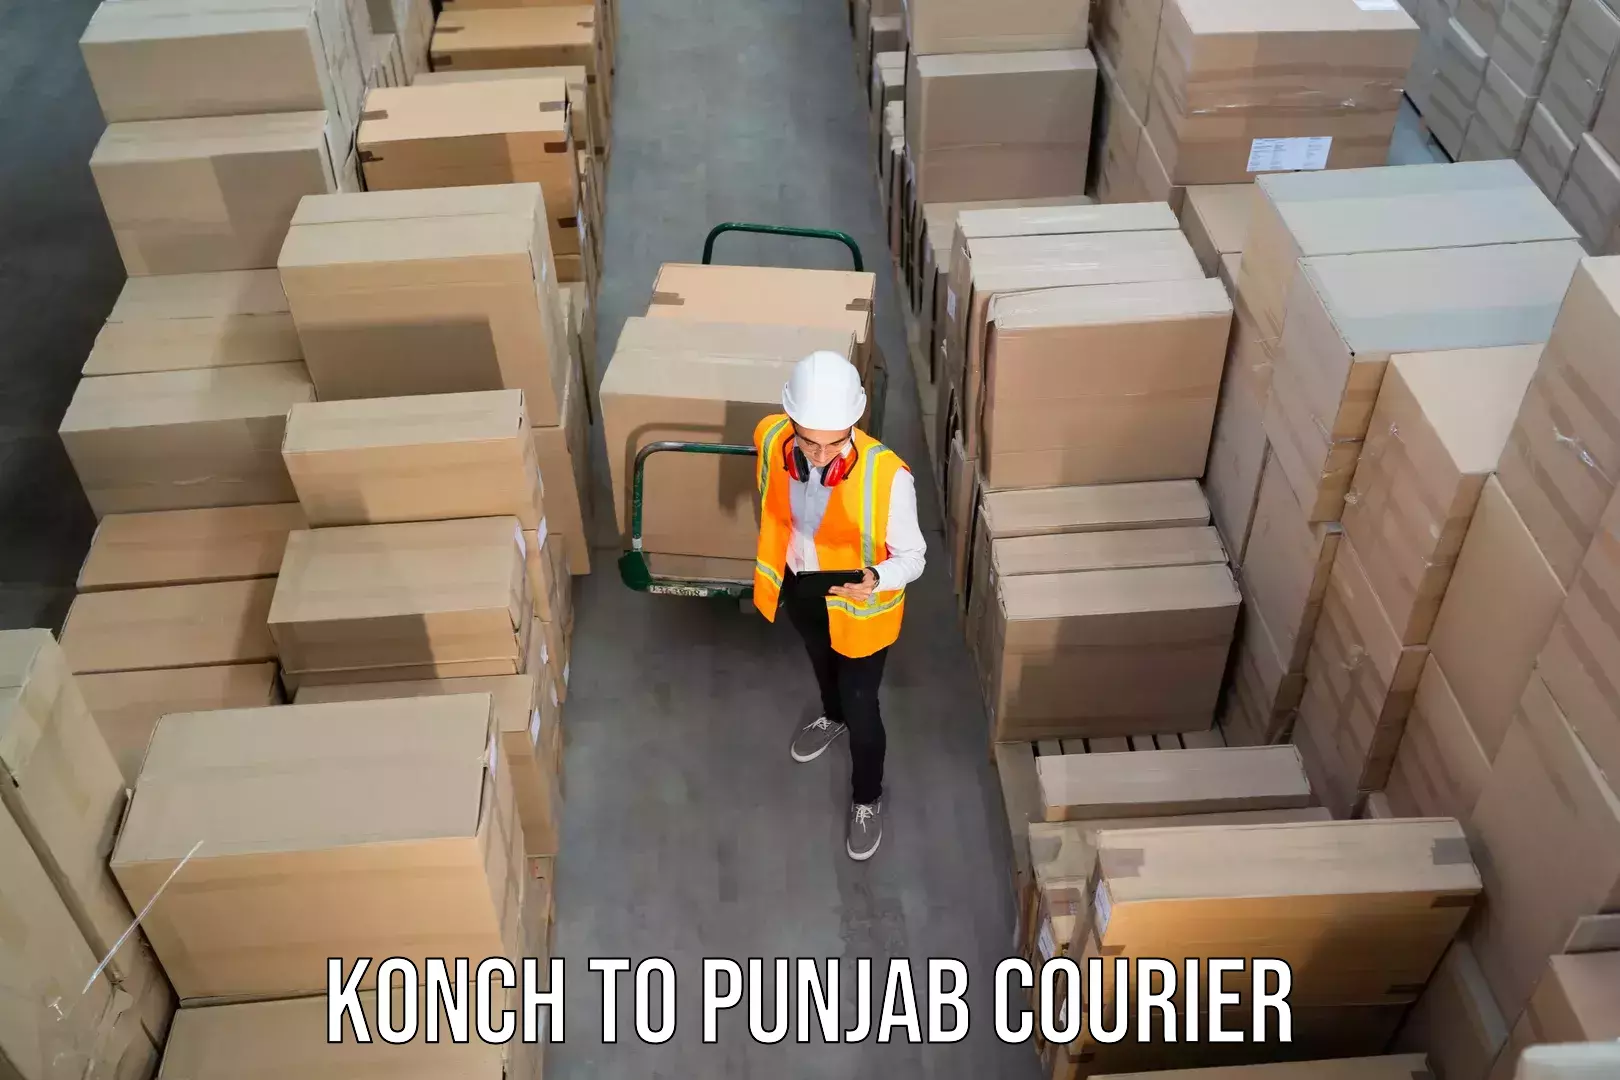 Flexible delivery scheduling Konch to Punjab